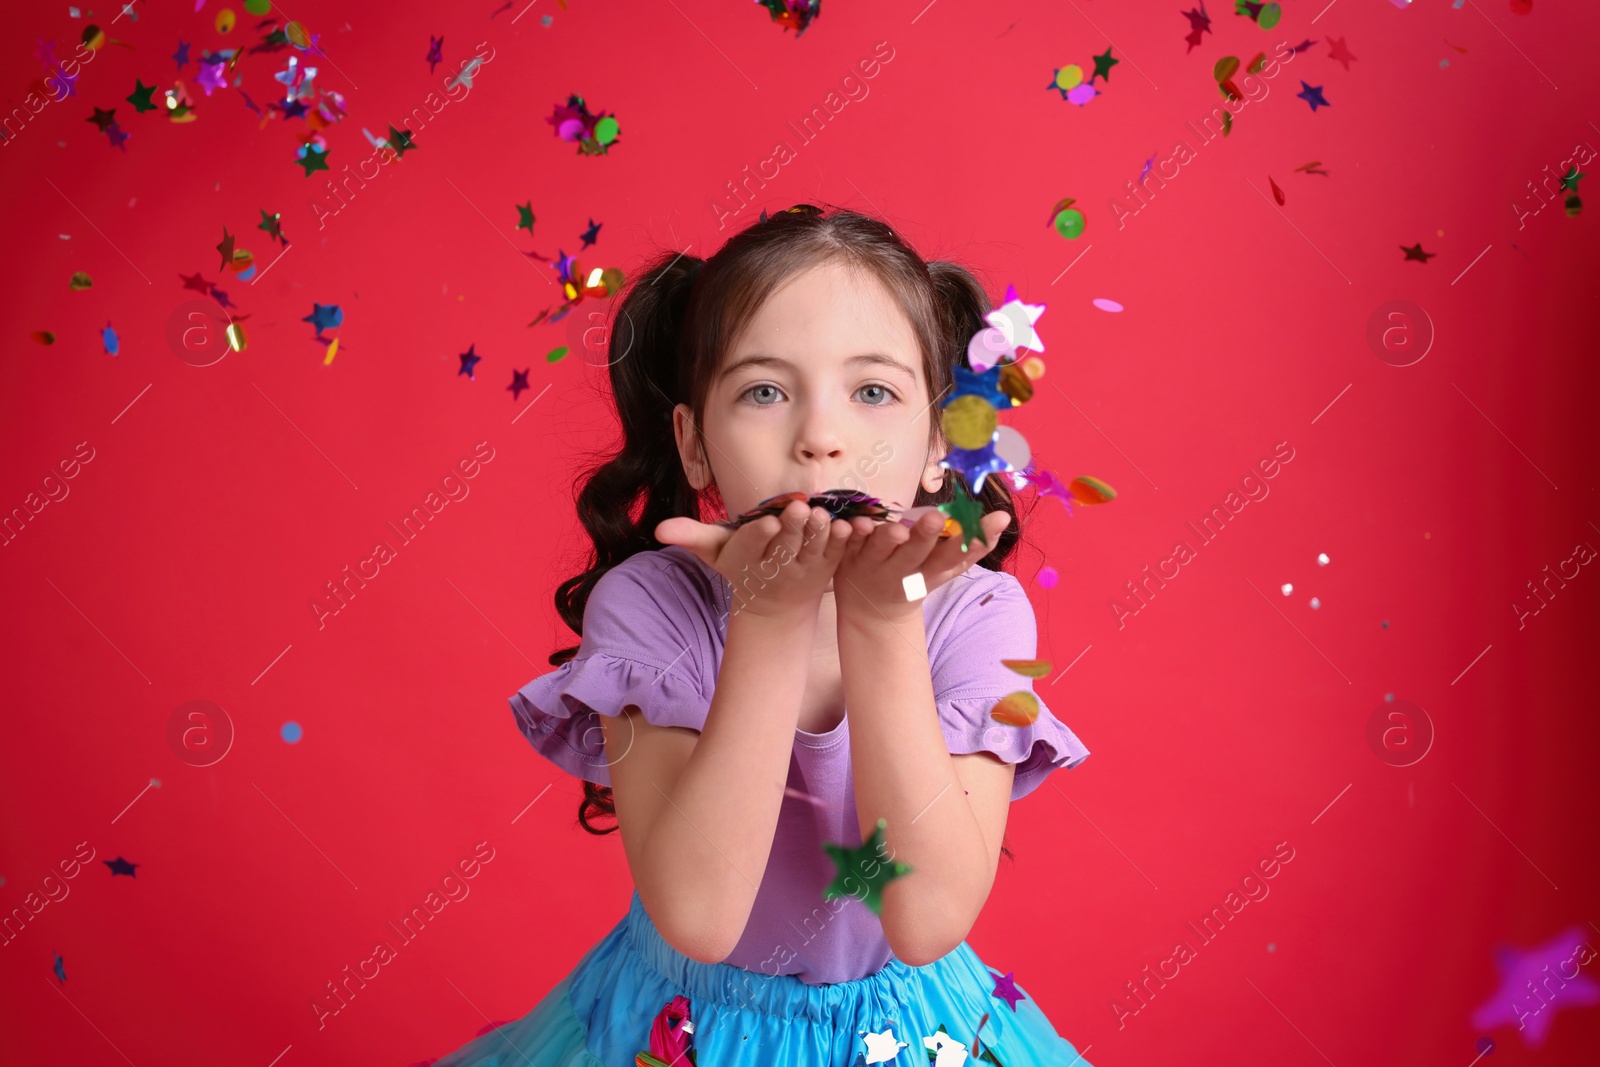 Photo of Adorable little girl blowing confetti on red background